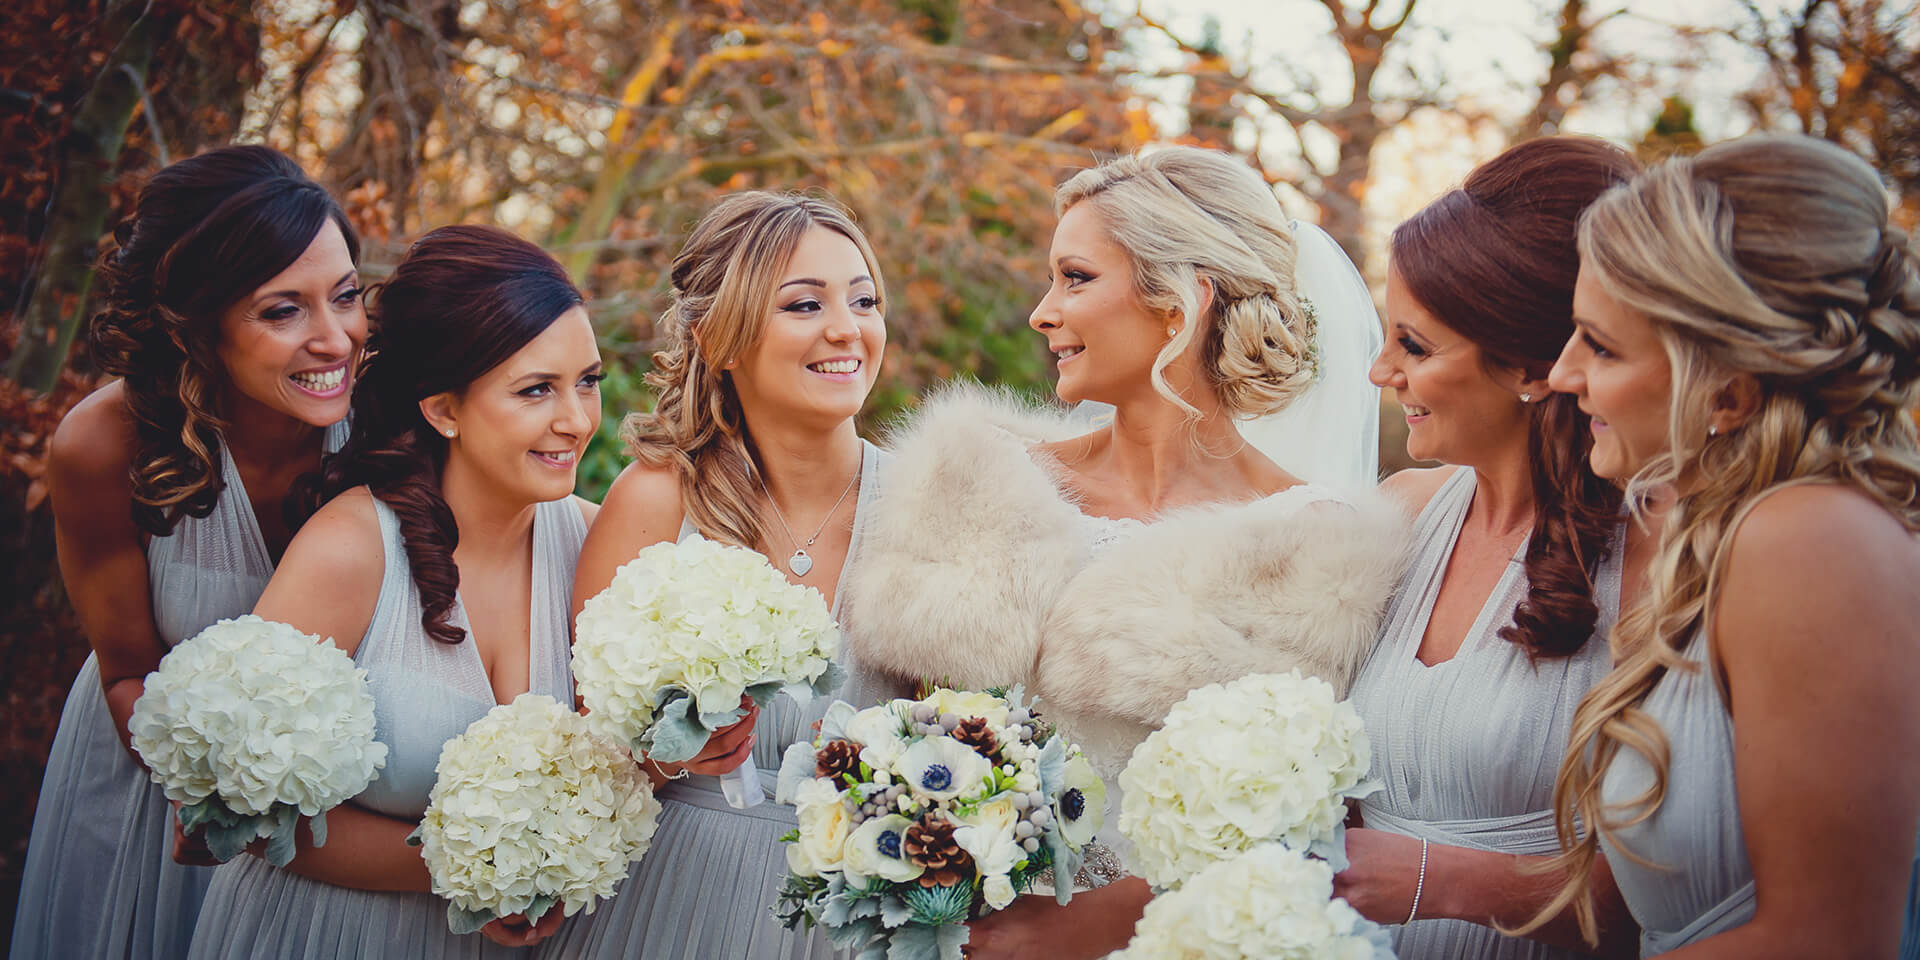 The bride wore a fur shawl to keep warm during her winter wedding at one of Hampshire's finest wedding venues